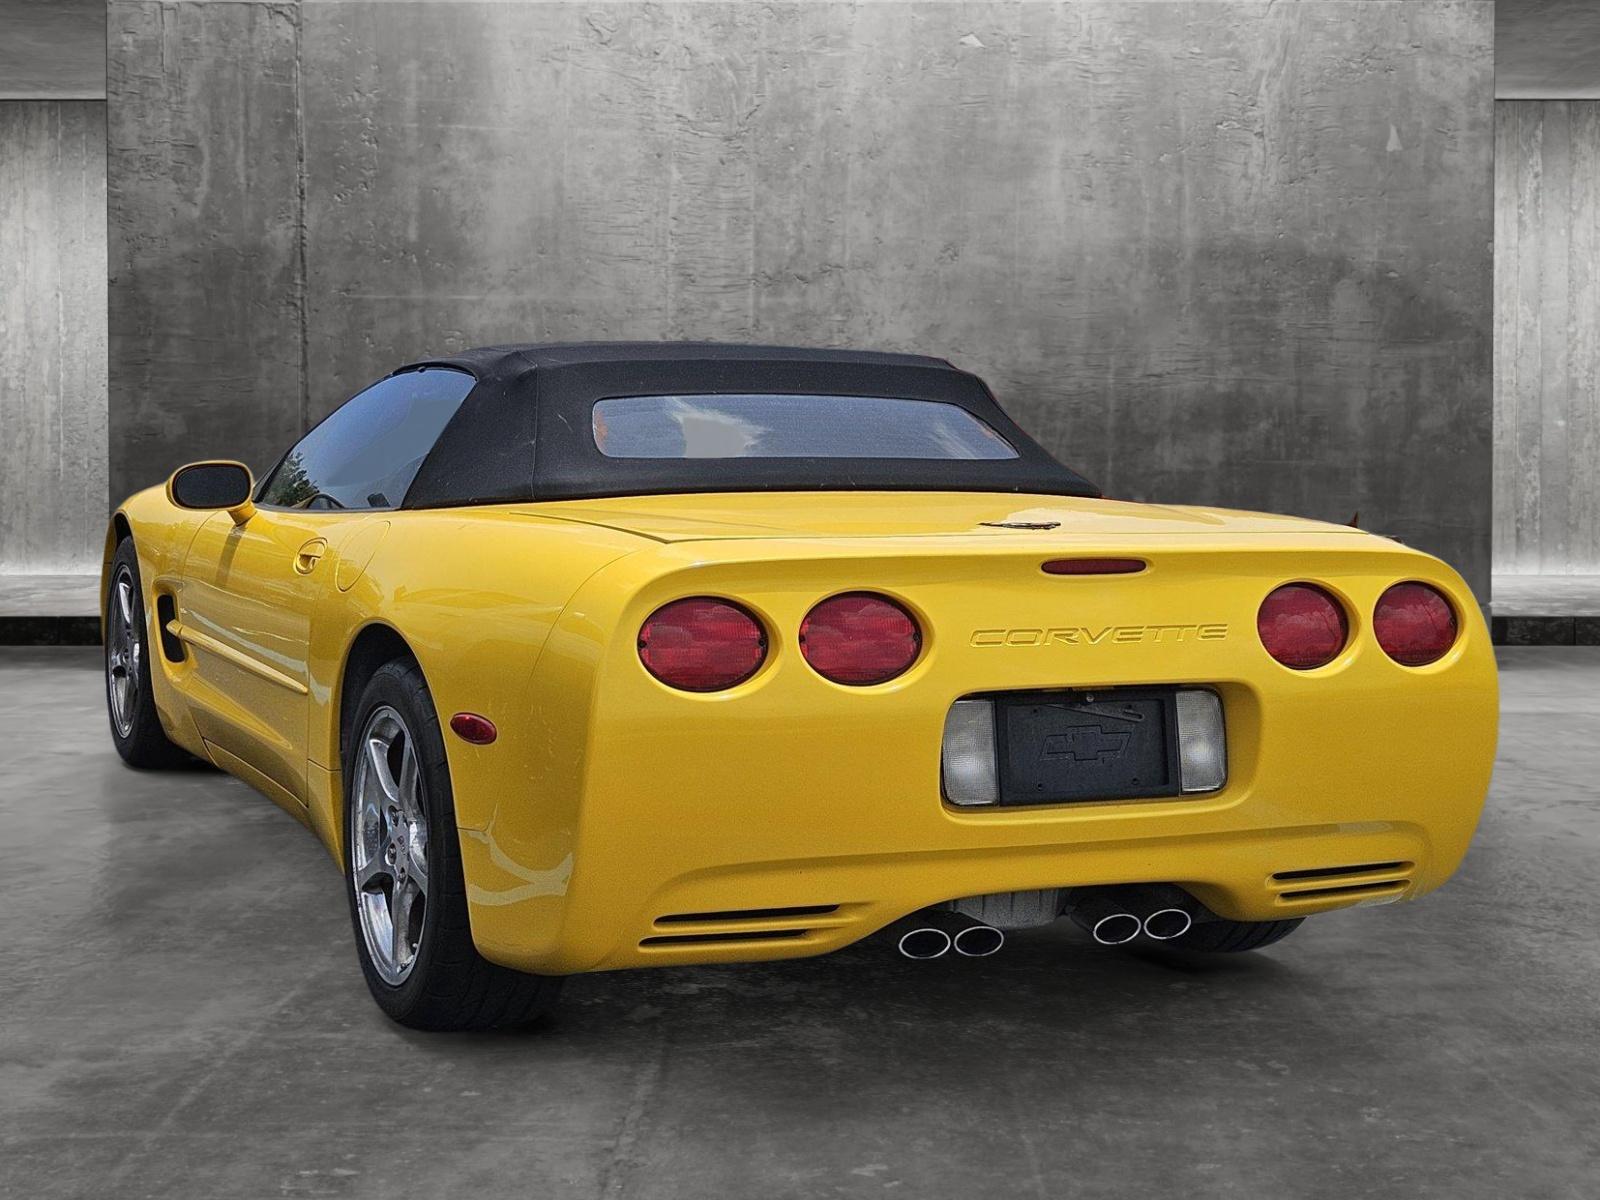 2004 Chevrolet Corvette Vehicle Photo in CLEARWATER, FL 33764-7163